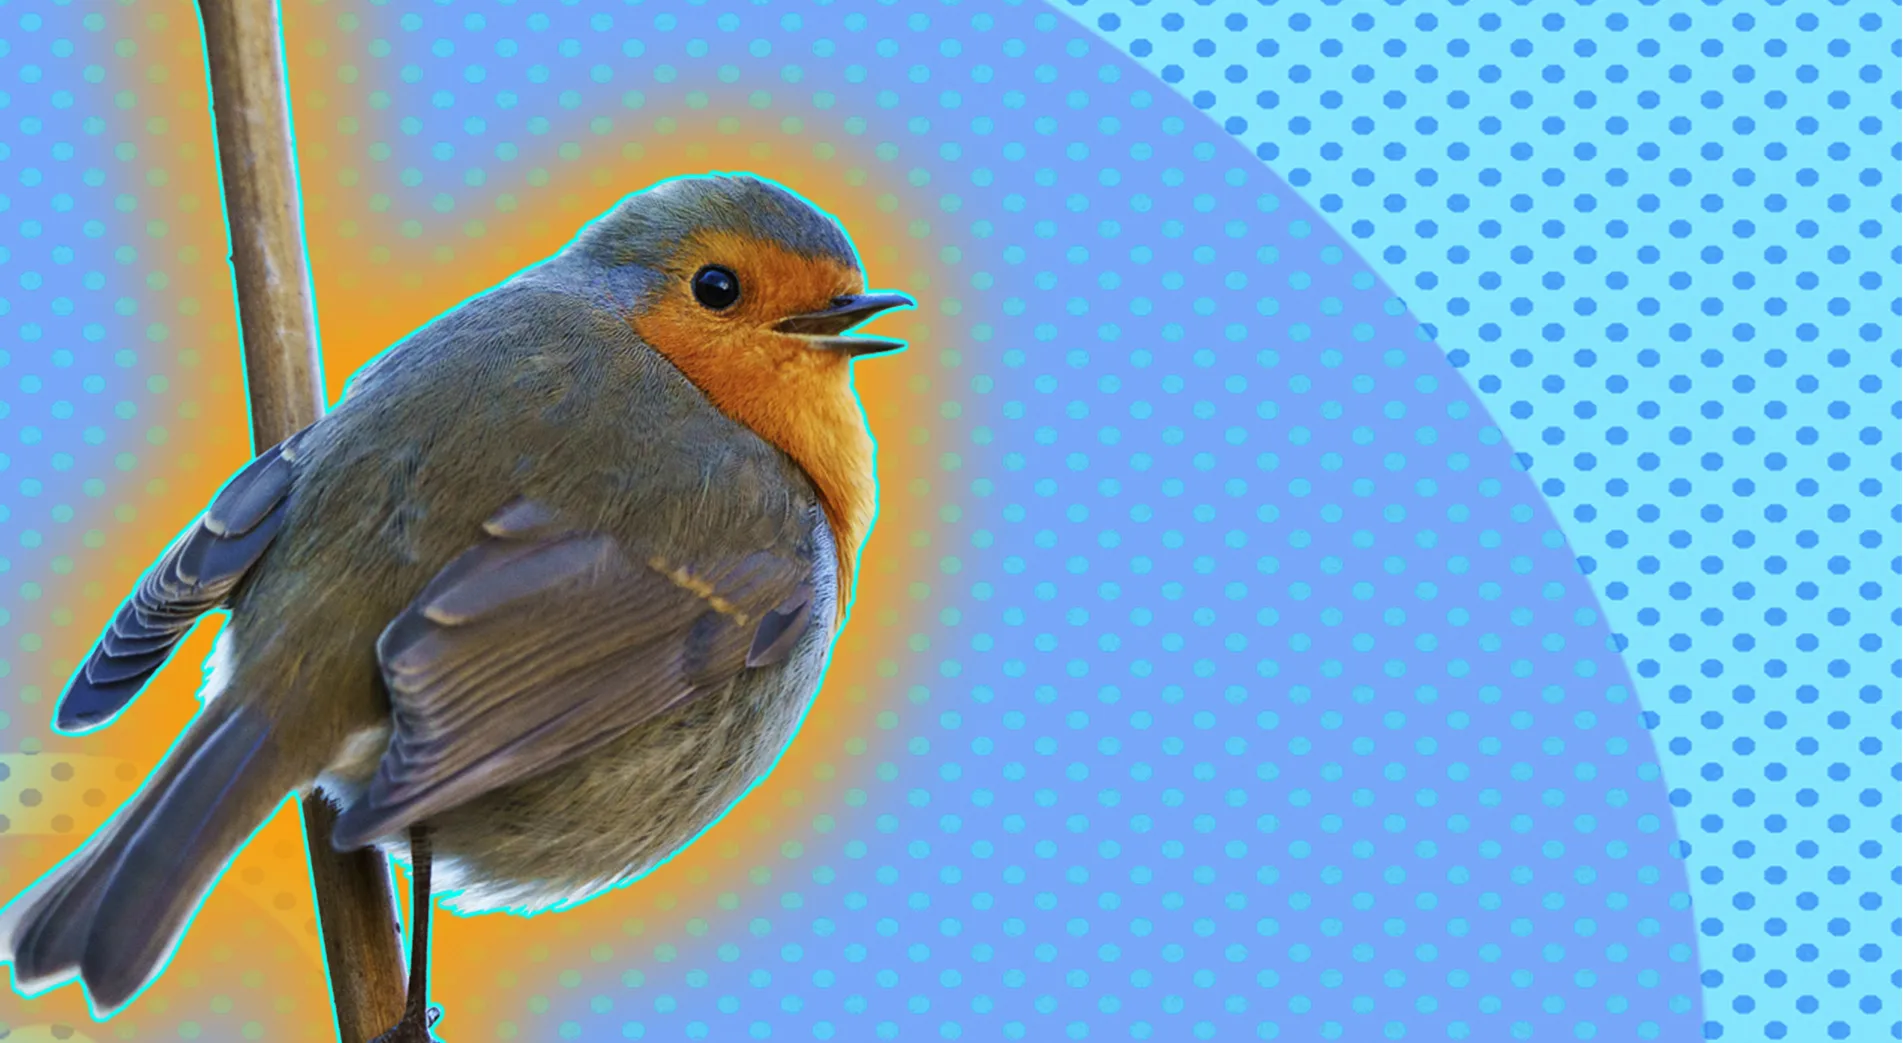 Robin sitting on tree branch, outlined by orange halo effect on blue-dotted background.